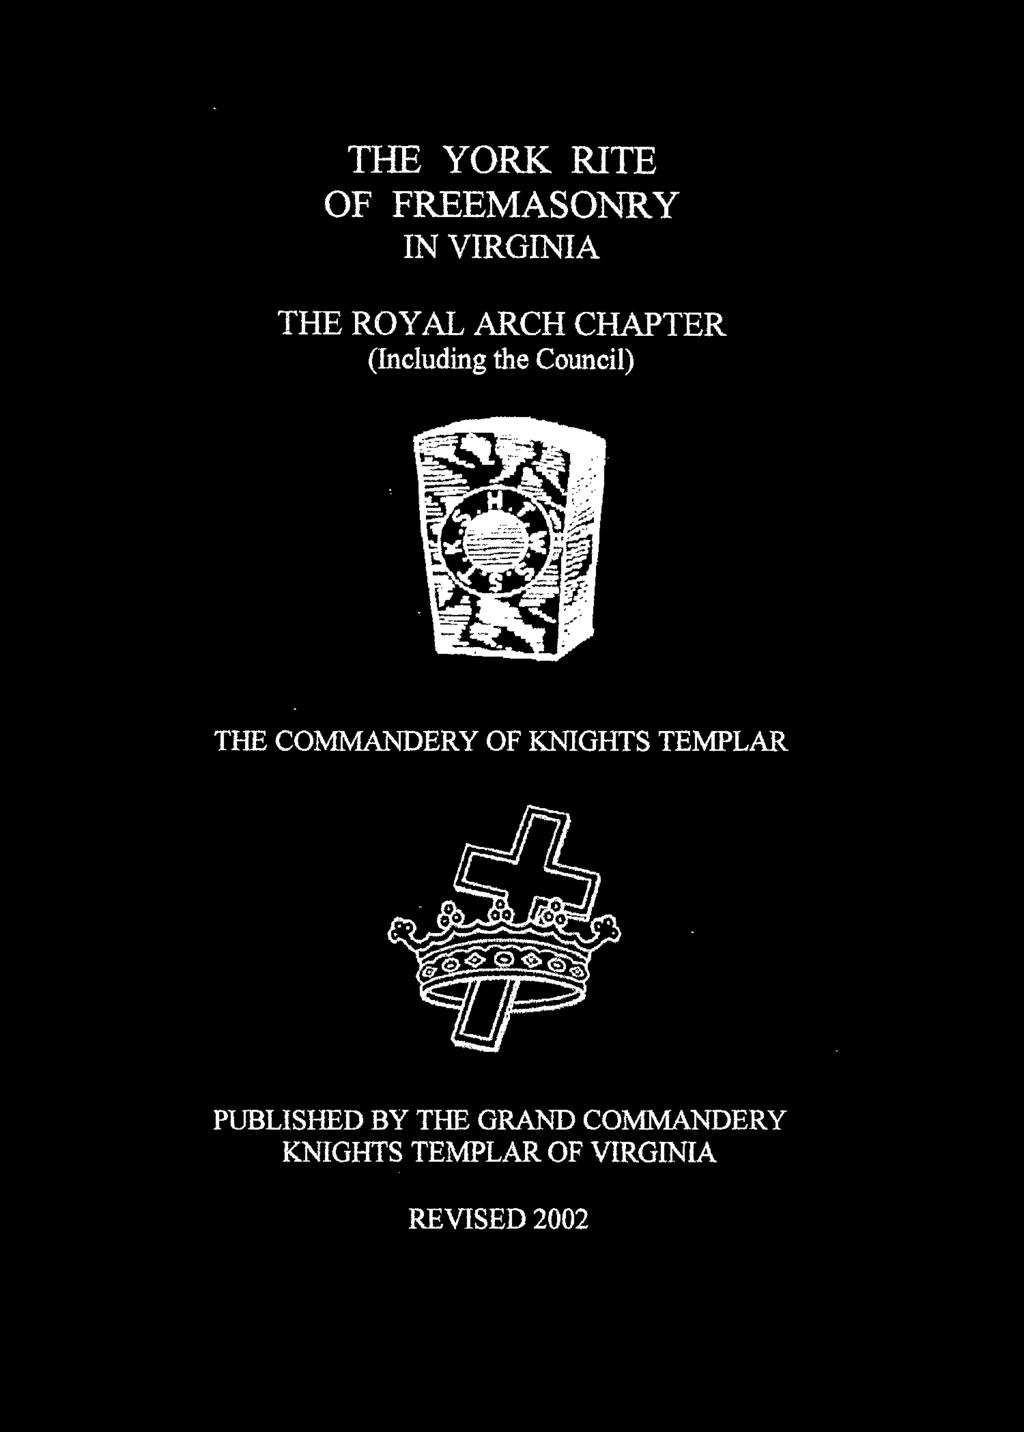 COMMANDERY OF KNIGHTS TEMPLAR PUBLISHED BY THE